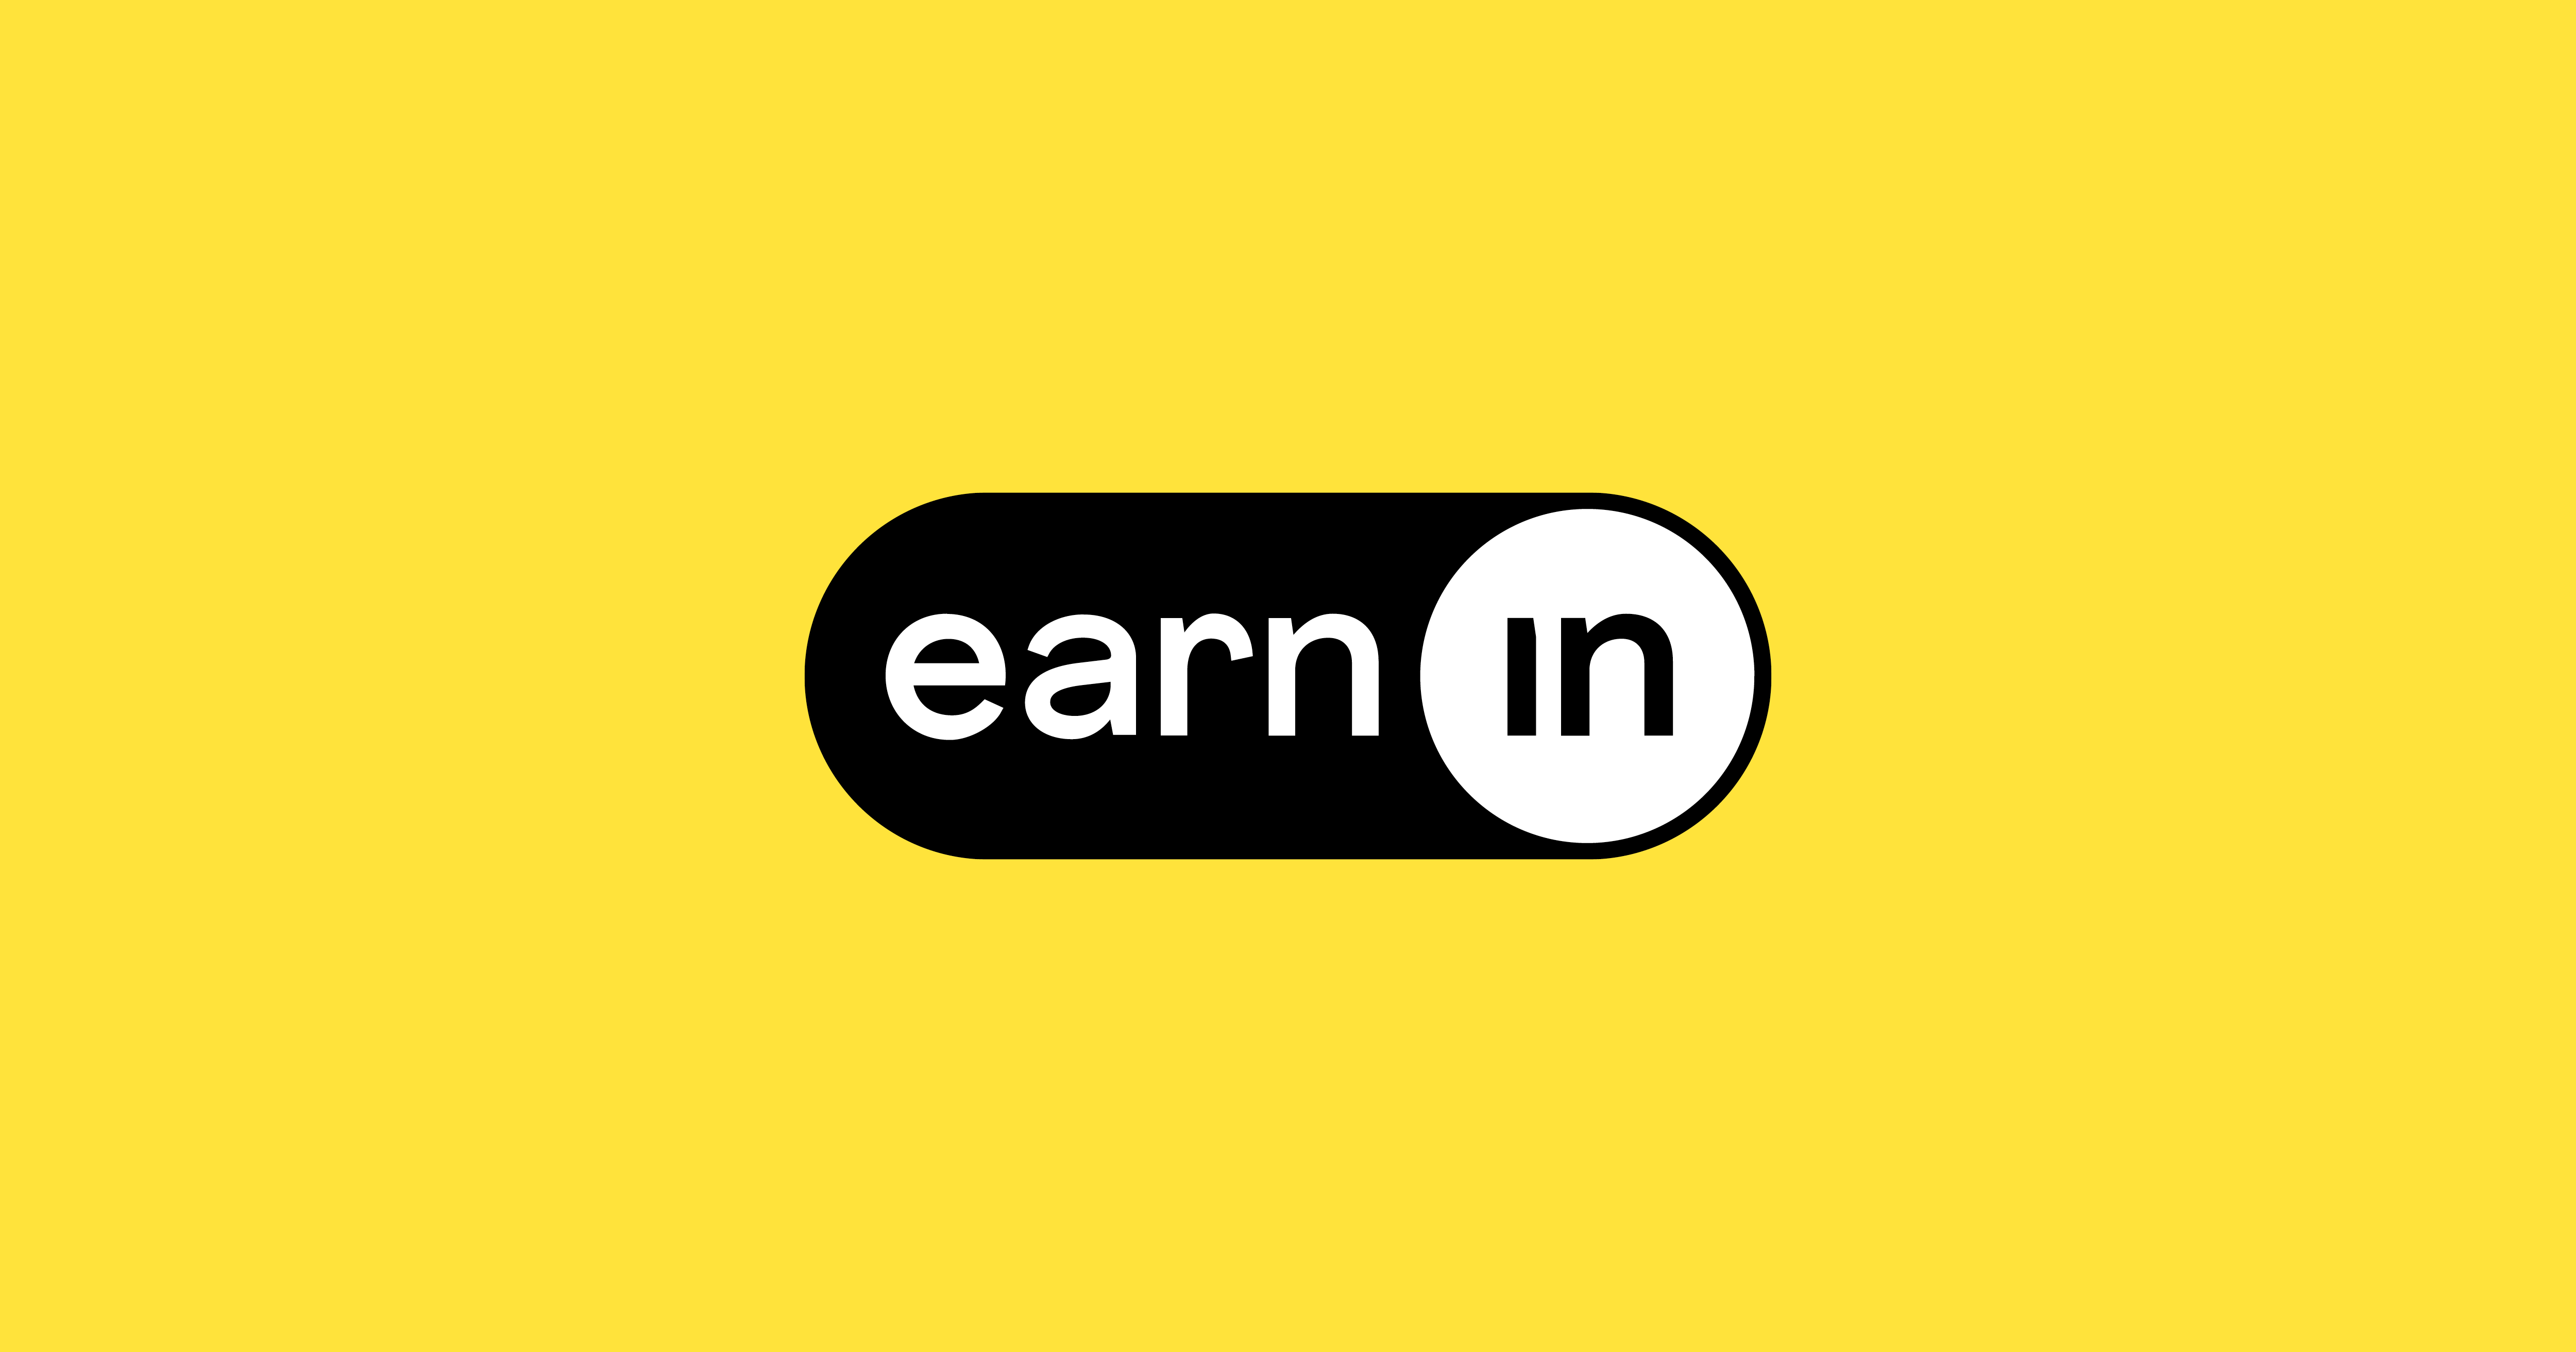 Earnin: You worked today. Get paid today